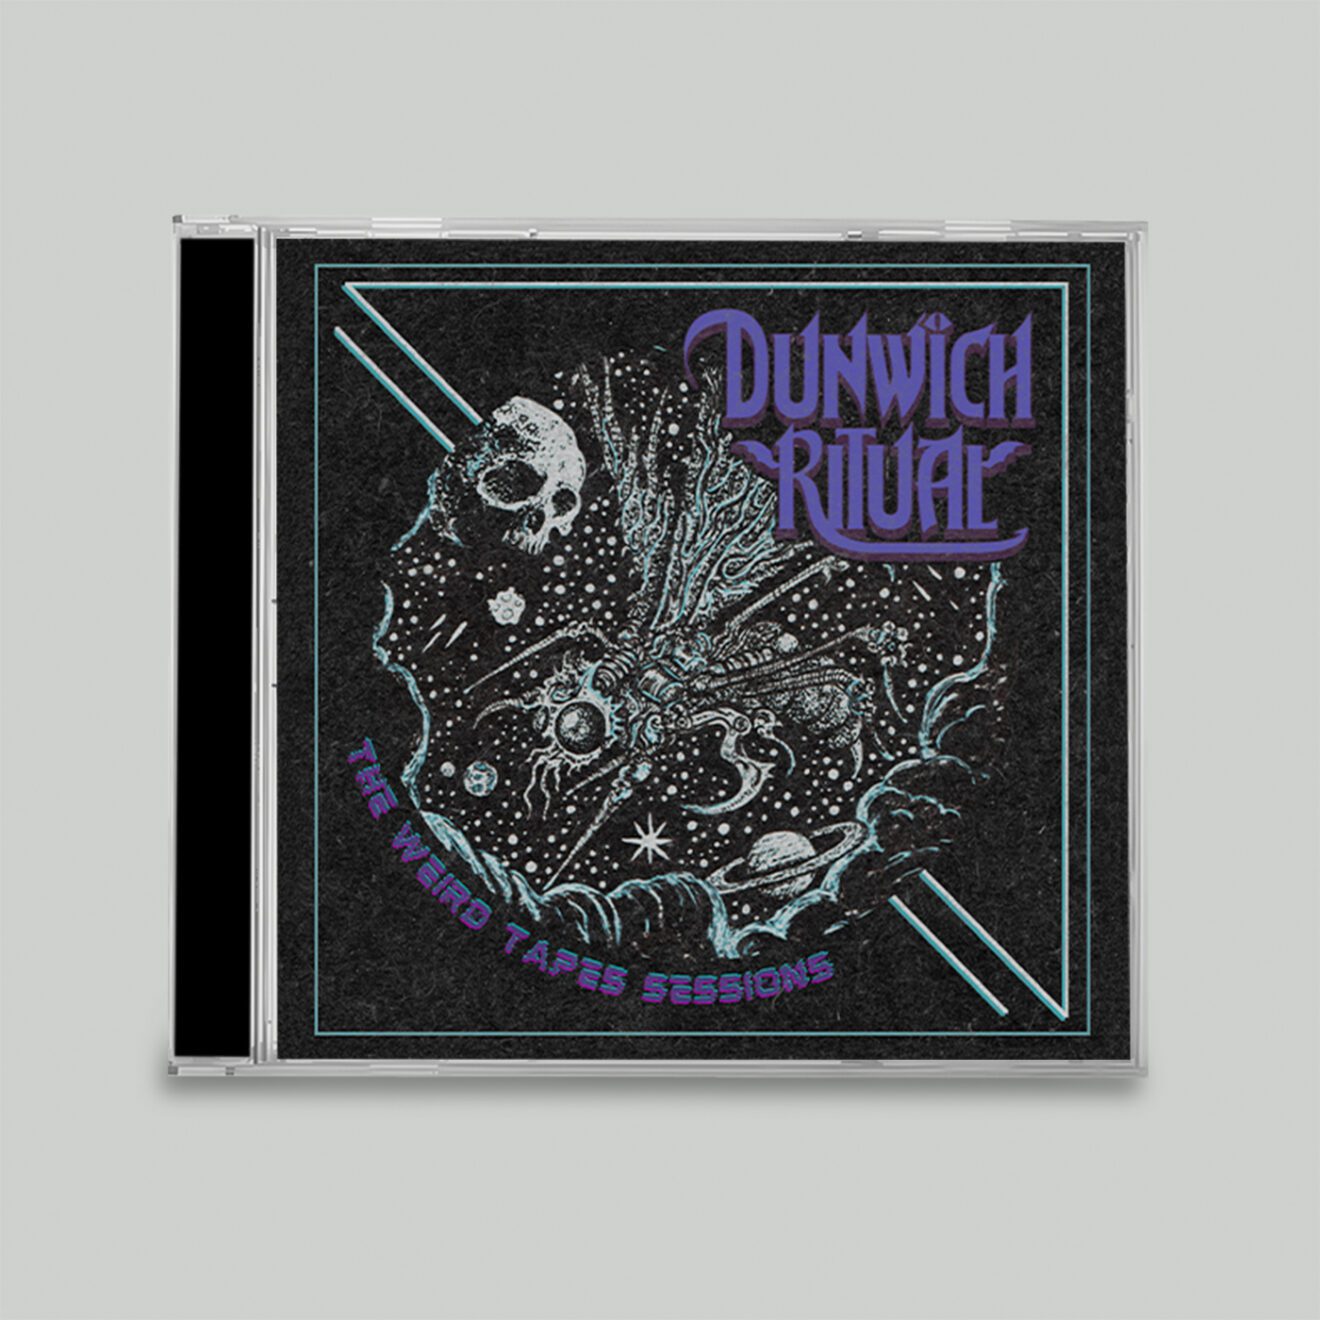 Dunwich Ritual – The Weird Tapes Sessions (CD)